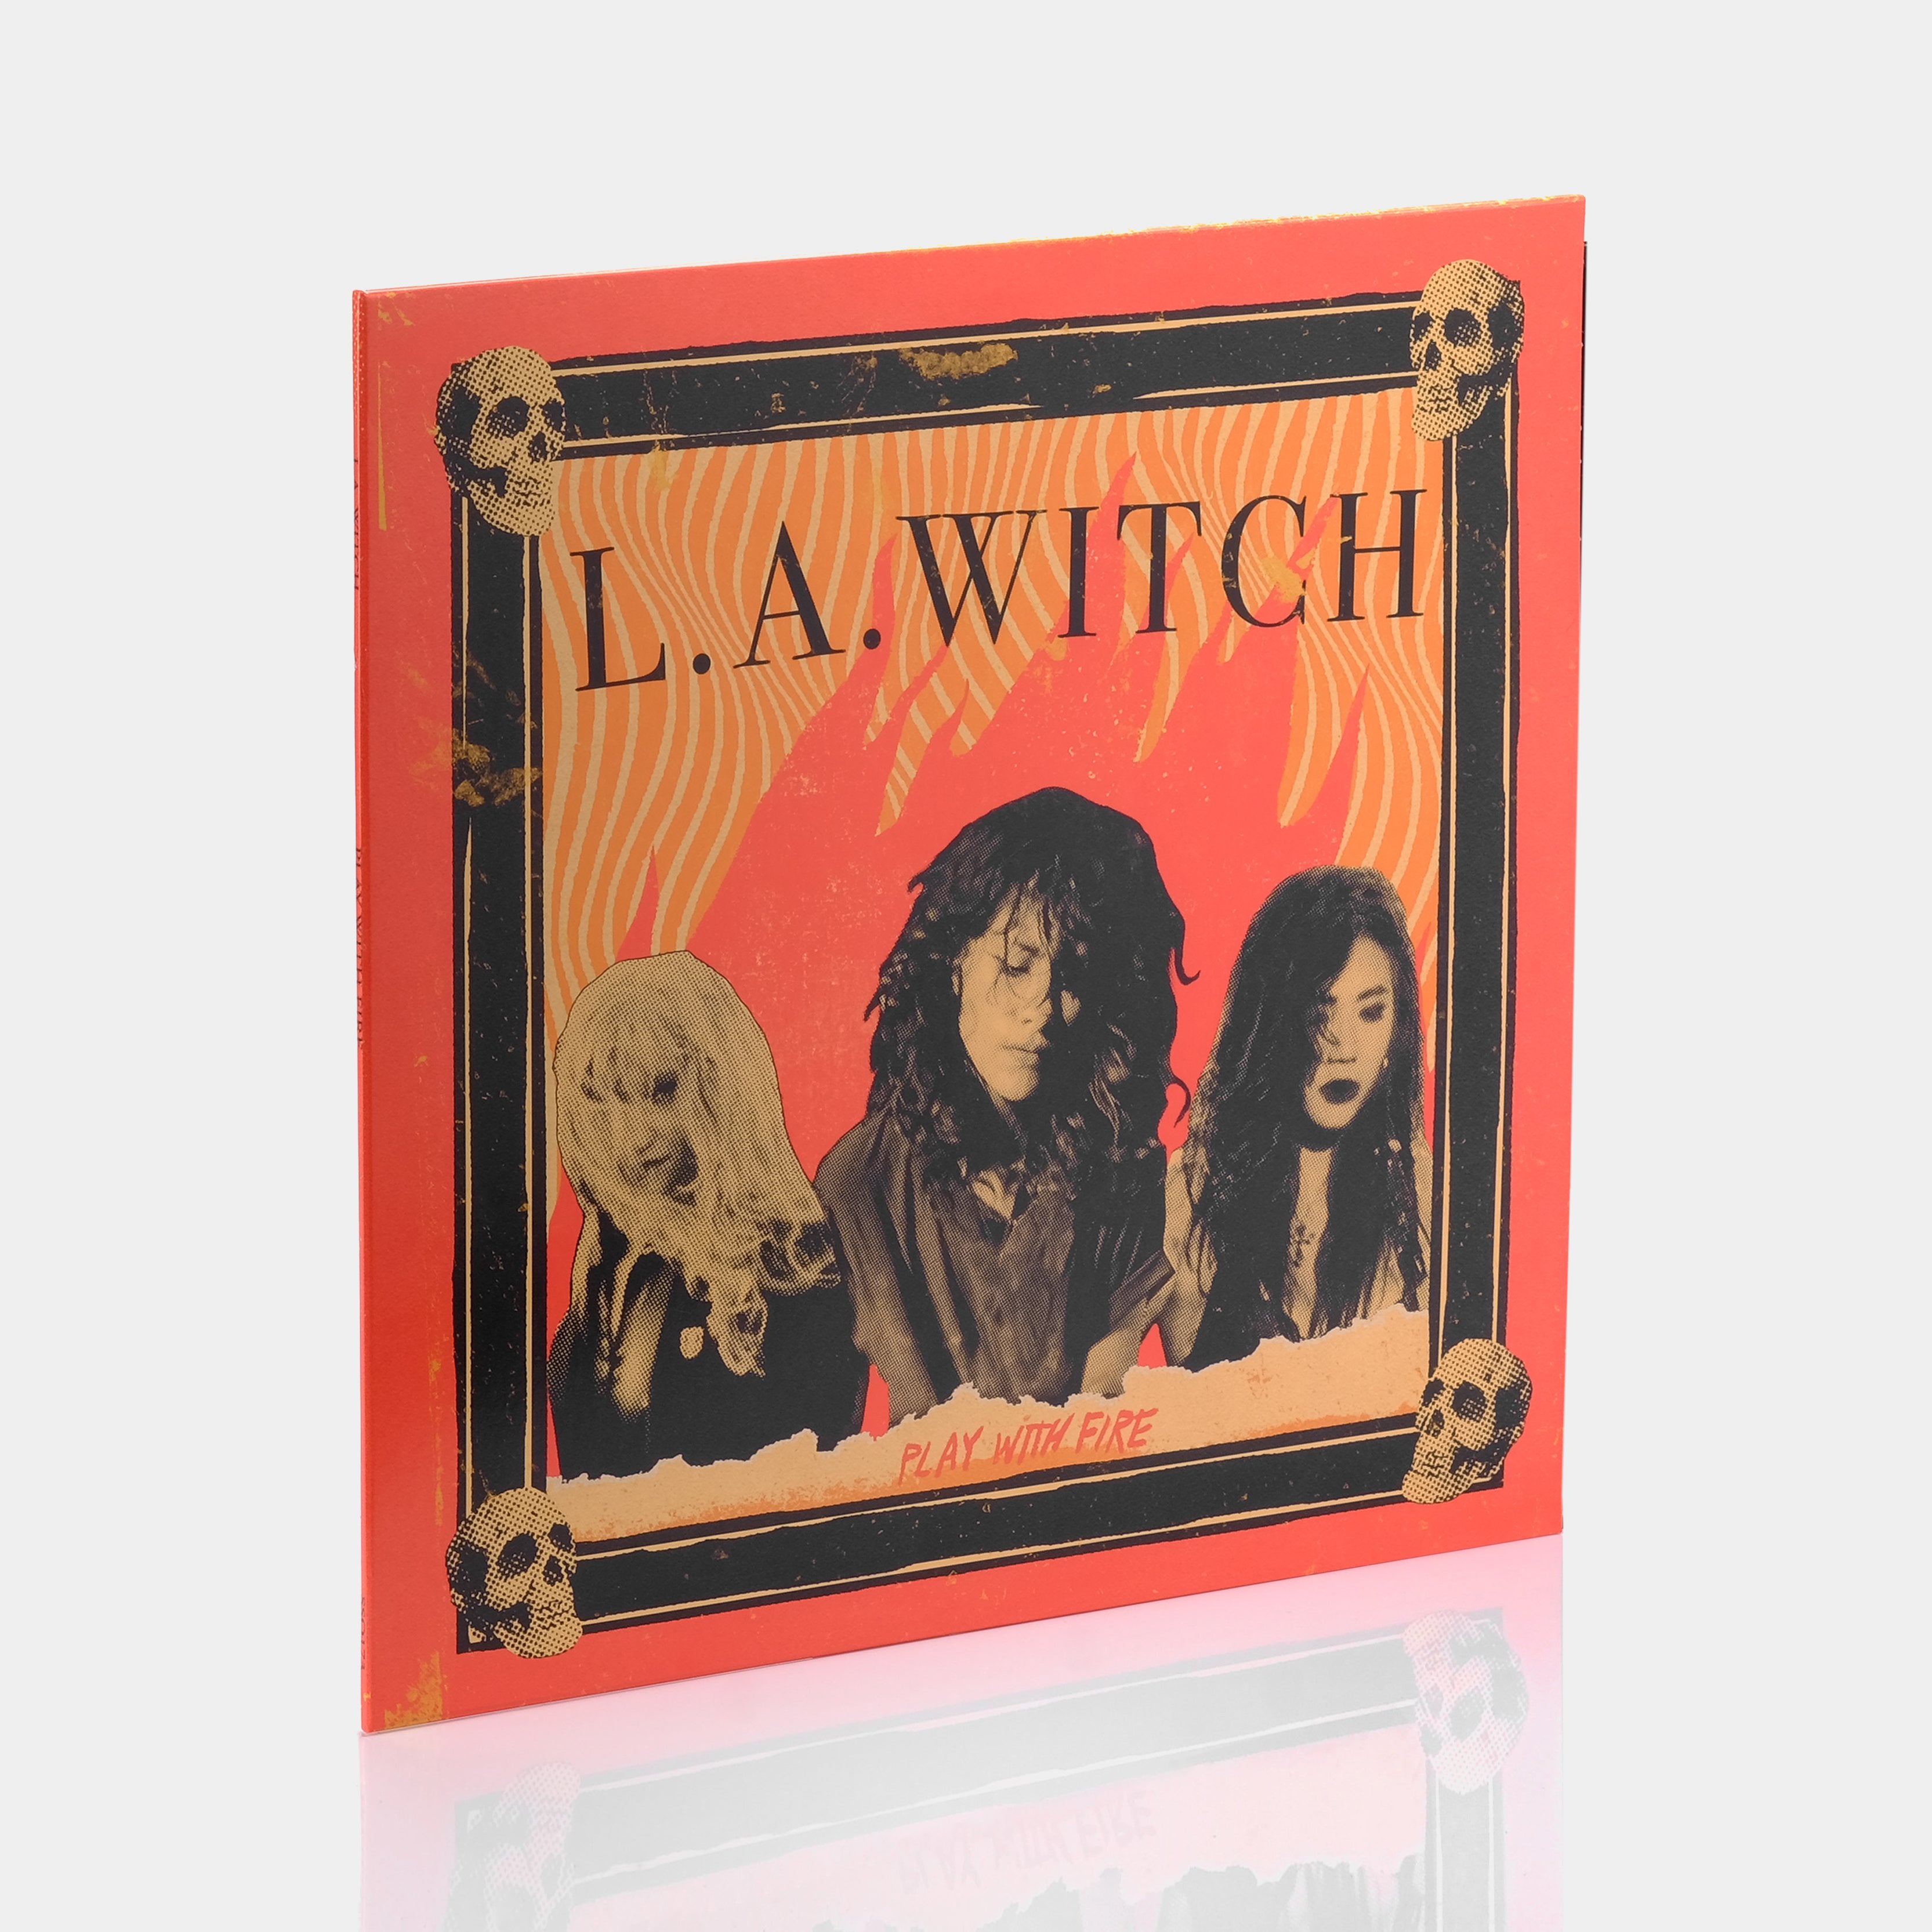 L.A. Witch - Play With Fire LP Vinyl Record